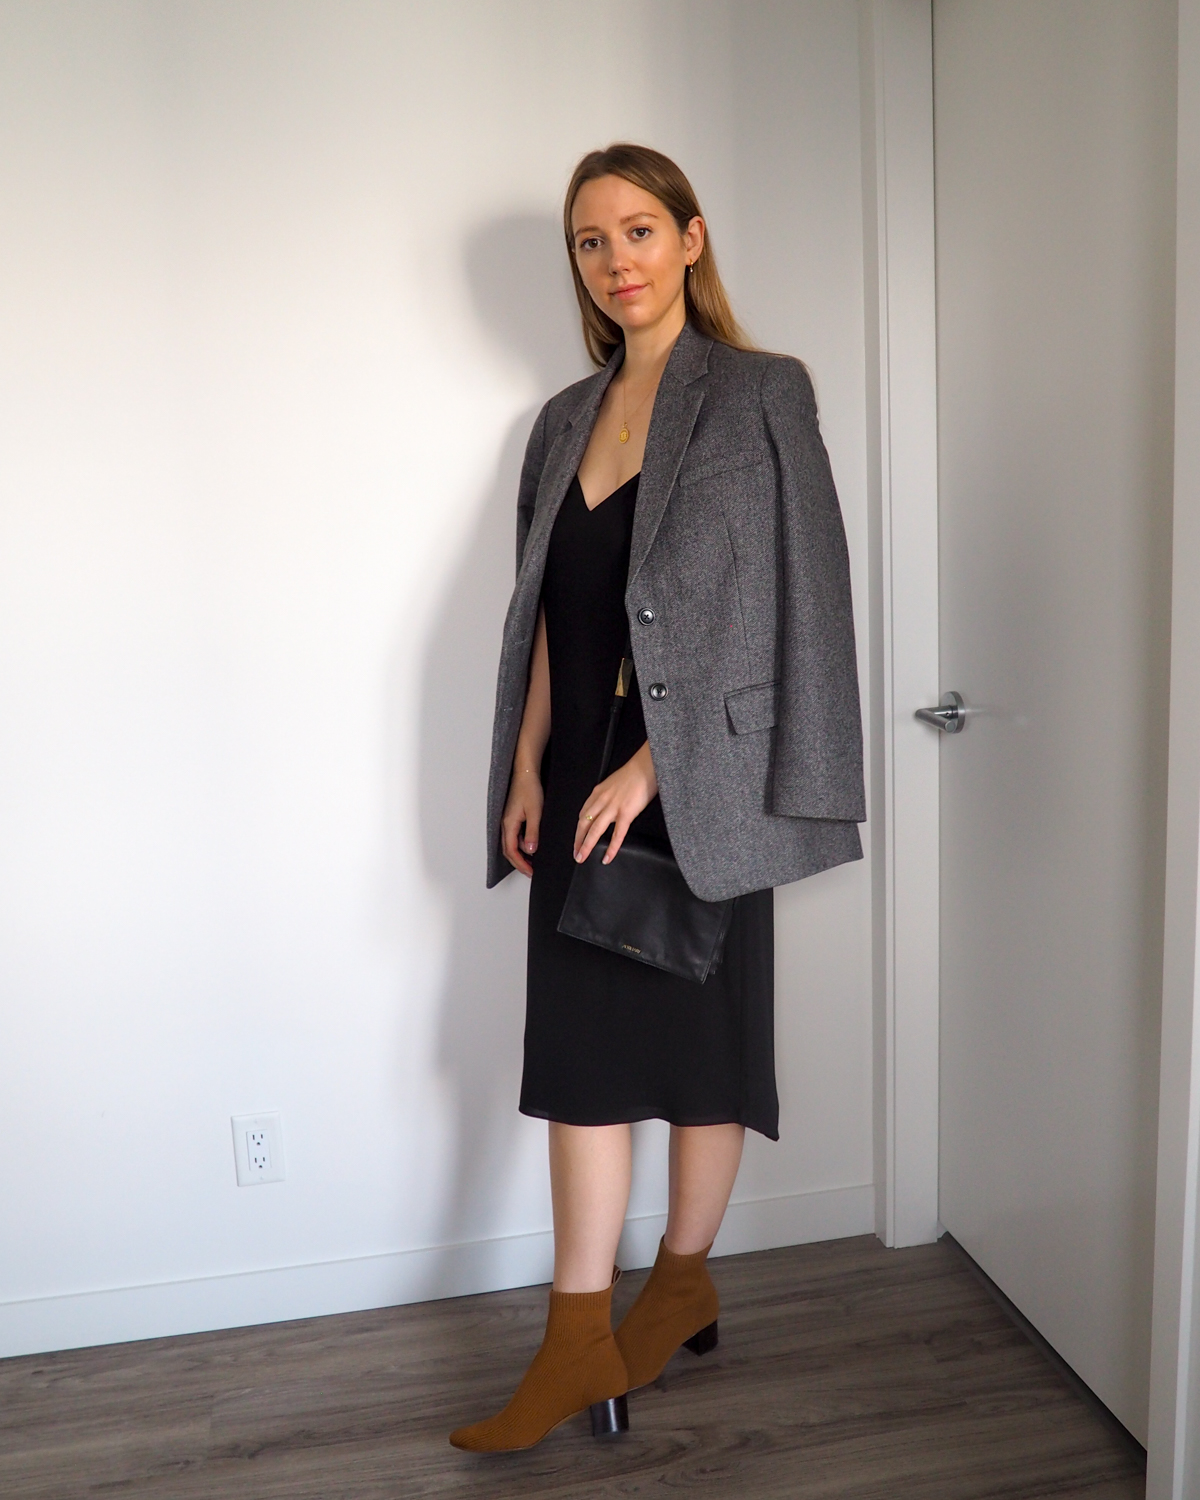 How to Style Boots & Blazers for Fall featuring Everlane - Emily Lightly